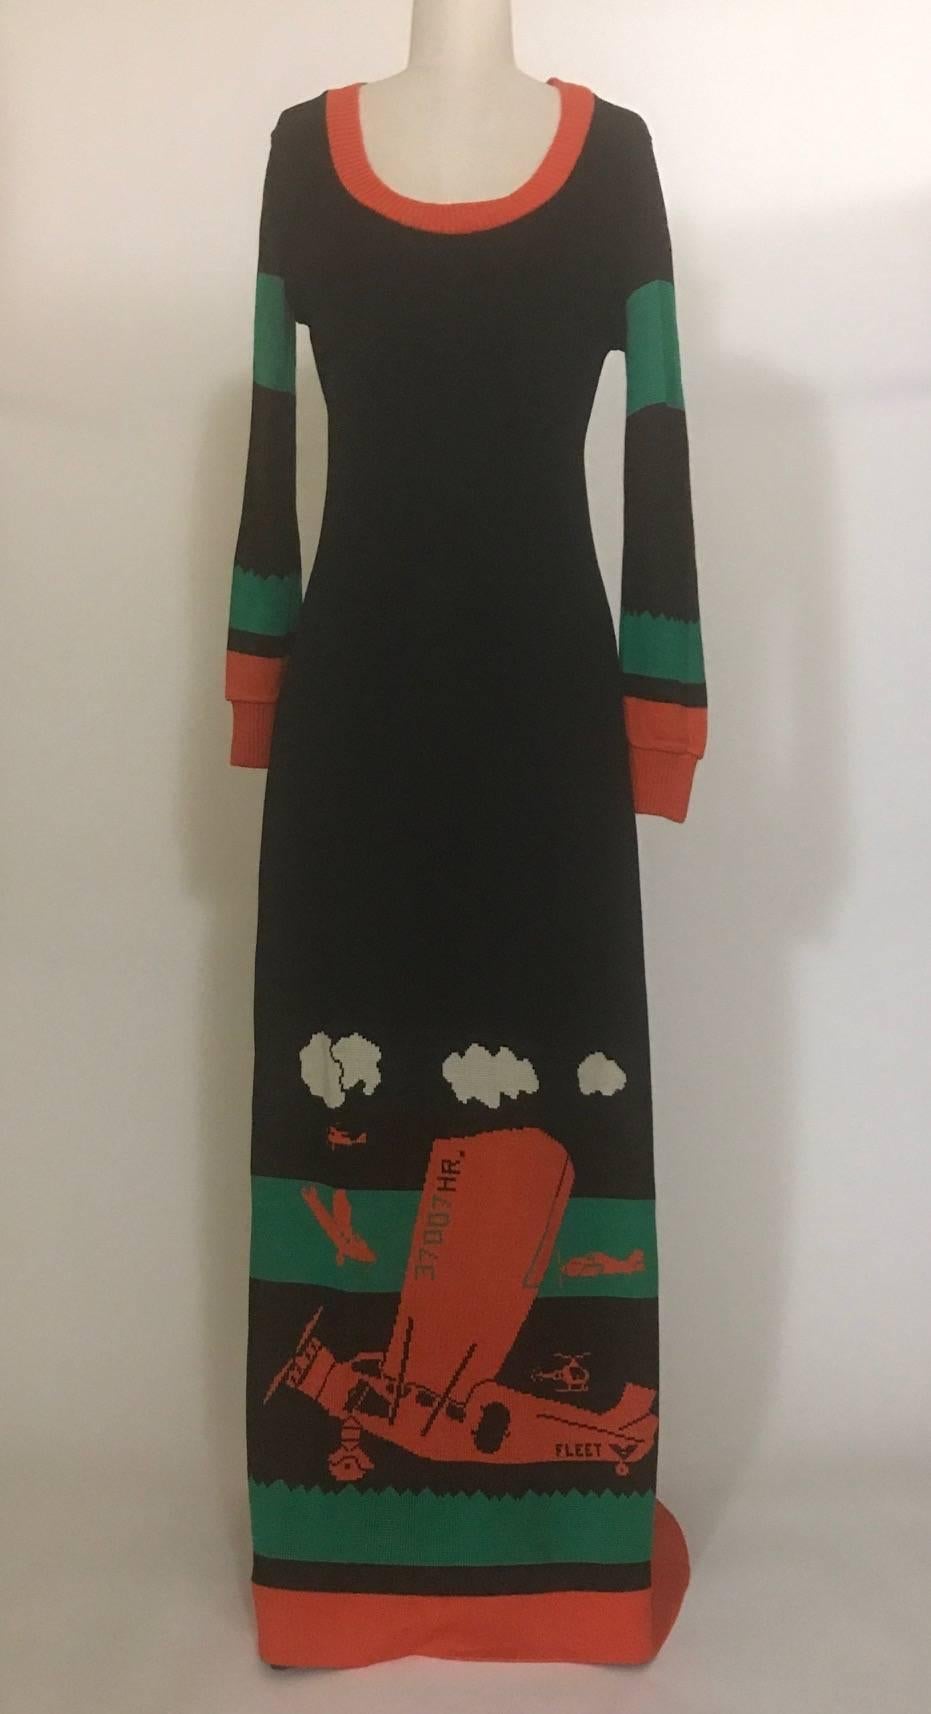 Vintage 1970s Sant'Angelo Knits for Saks Fifth Avenue sweater dress featuring Giorgio Sant'Angelo's iconic airplane design in a black, green, and red-orange intarsia double knit. 

No content tag, feels like acrylic.

No size tag. See measurements,